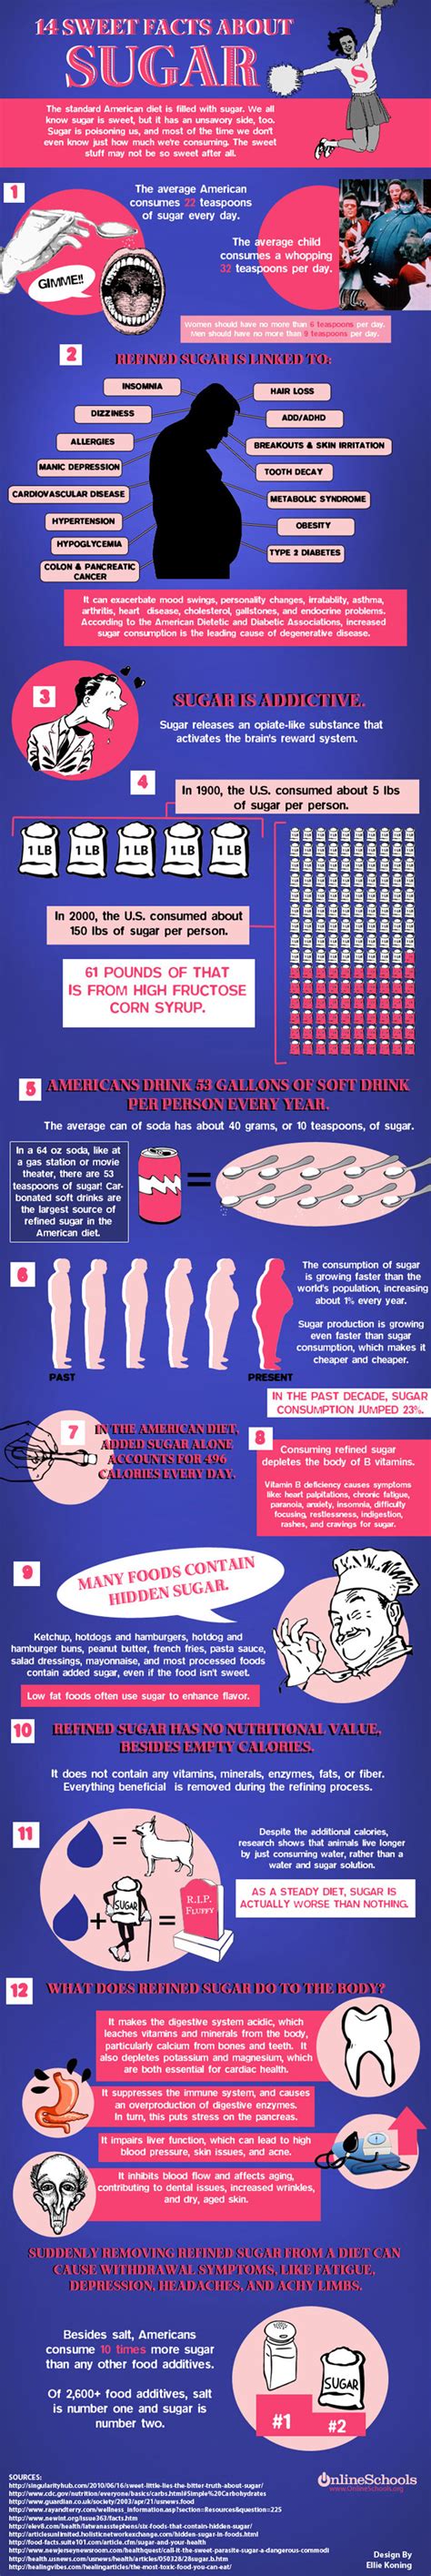 14 Sweet Facts About Sugar Infographic